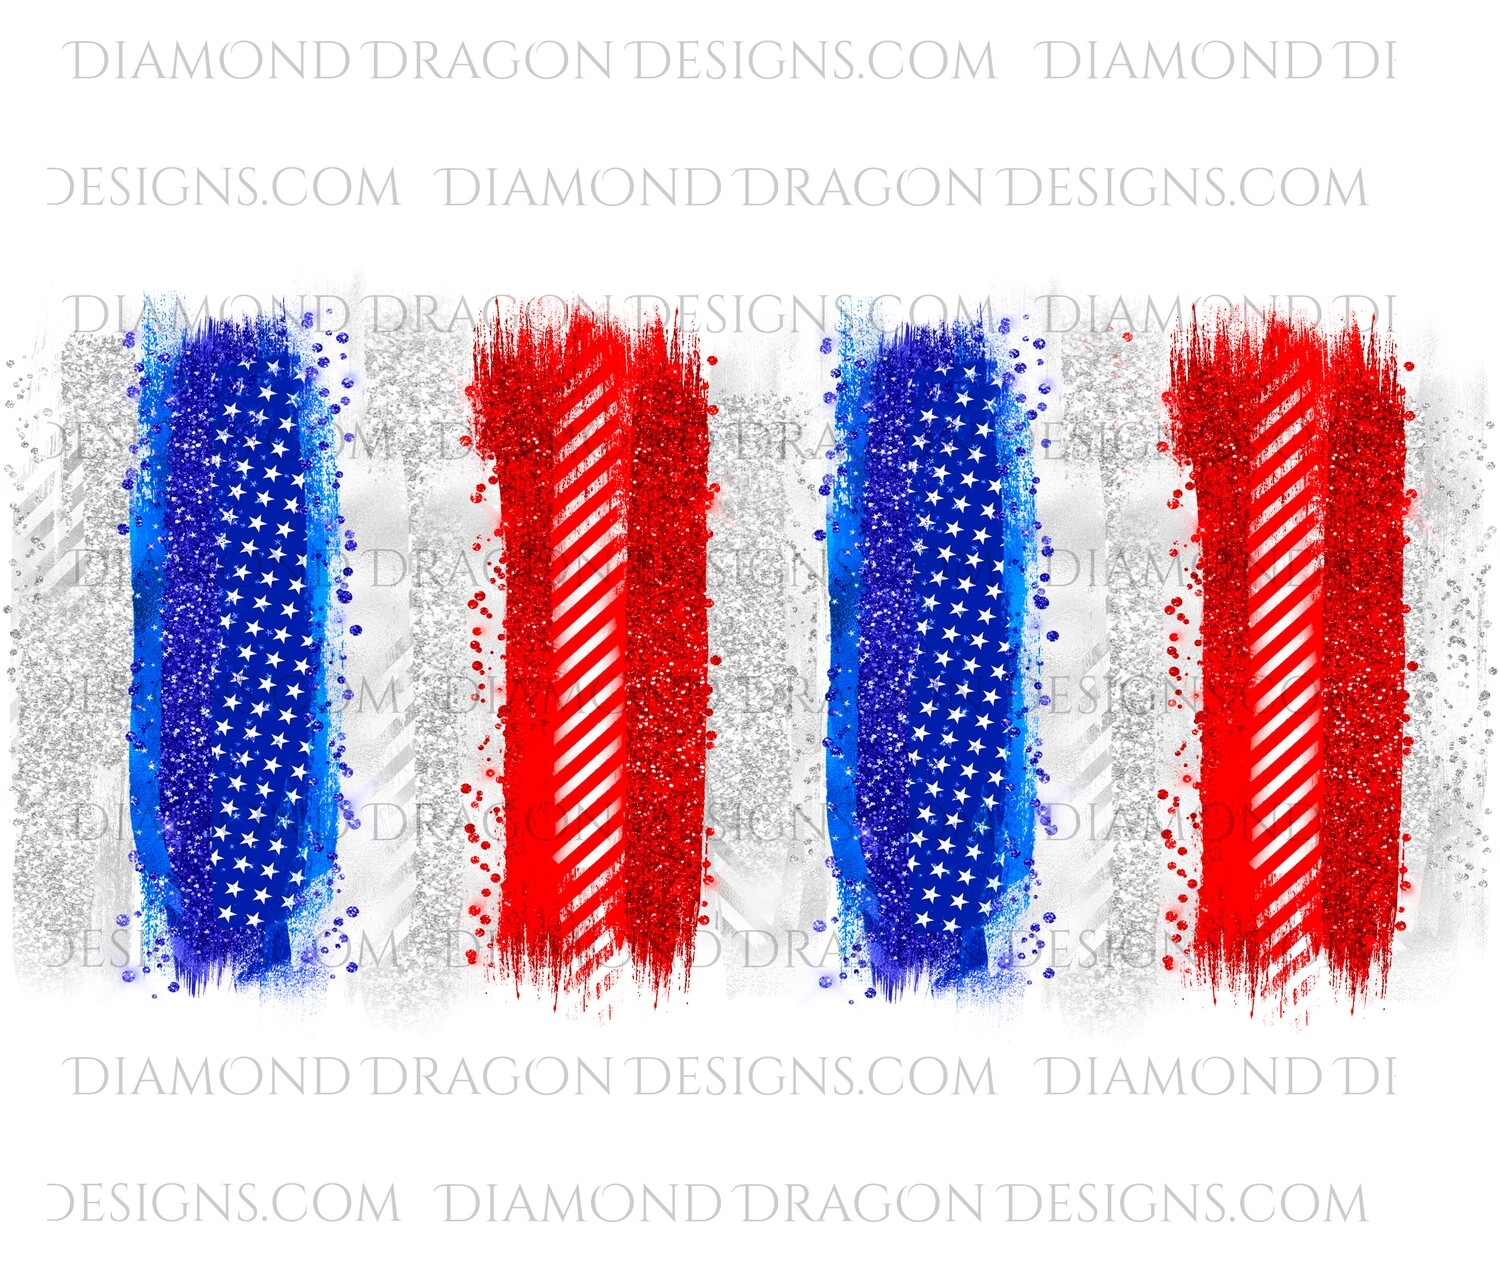 Full Page - Patriotic USA Wrap, 4th of July Wrap, Waterslide